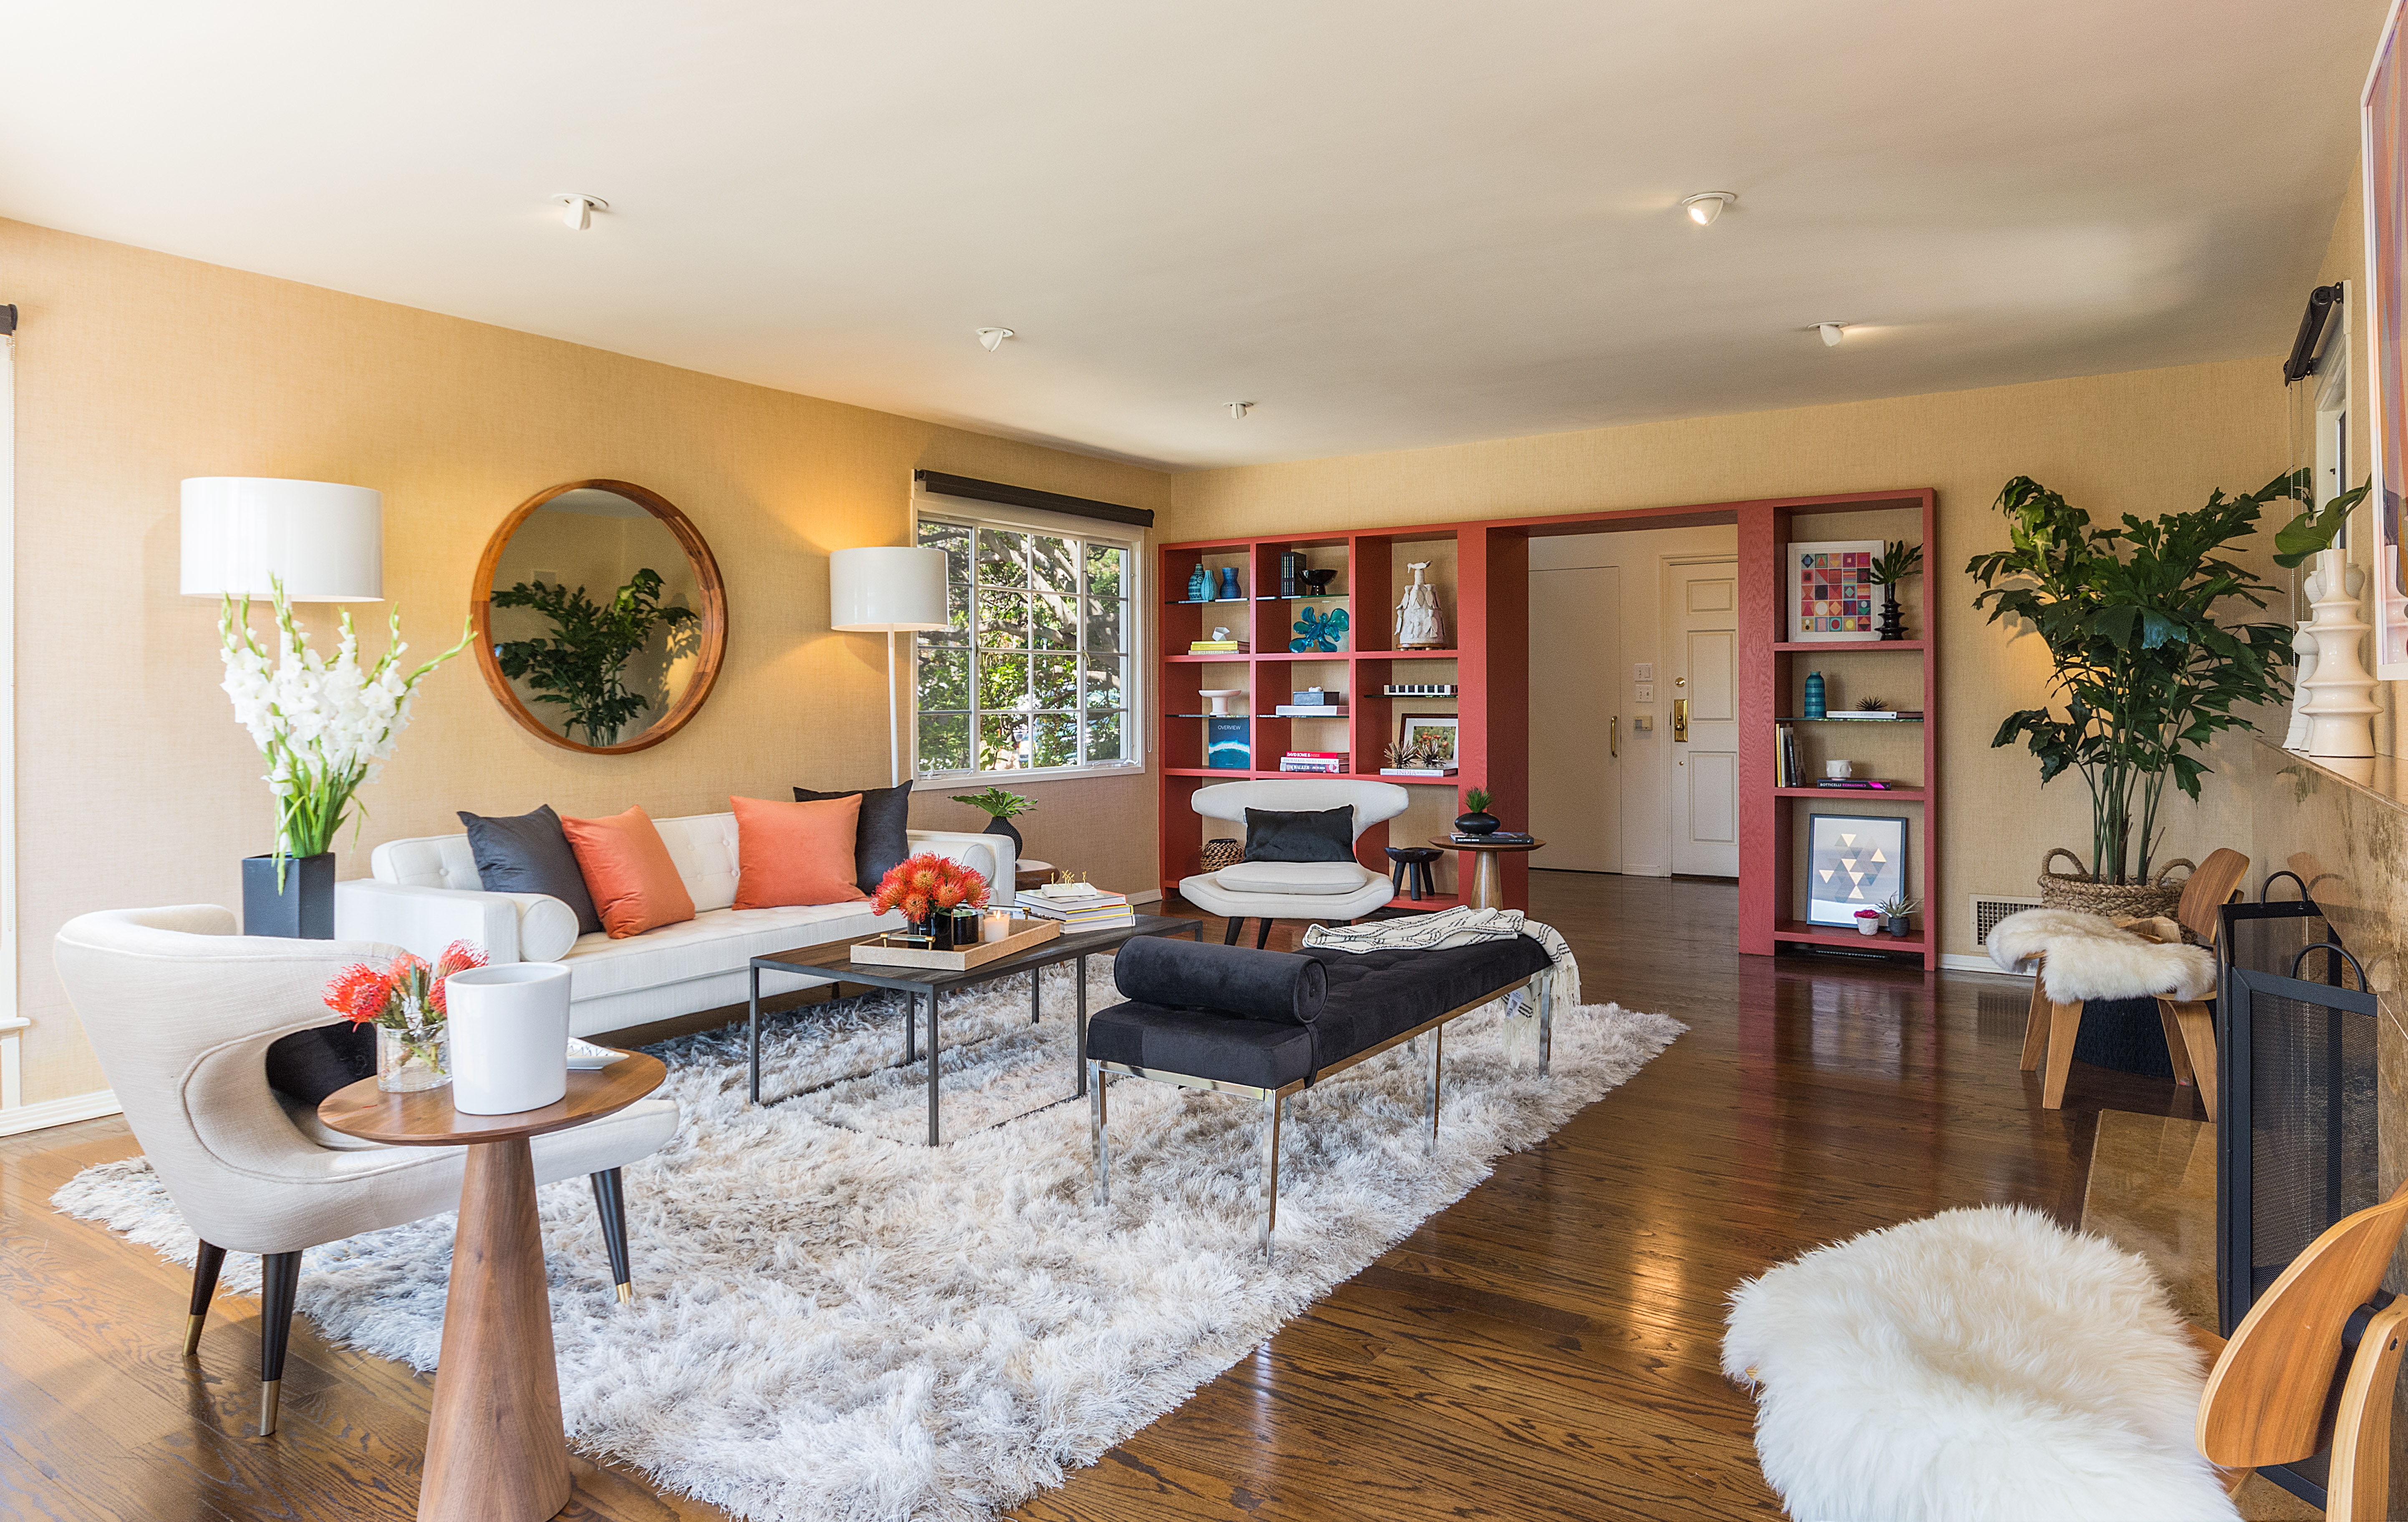 Featured Home-BHPO, Featured Mid Century-BHPO, Featured Real Estate-BHPO, Featured Architecture-BHPO, Featured Architectural-BHPO, Featured House-BHPO,